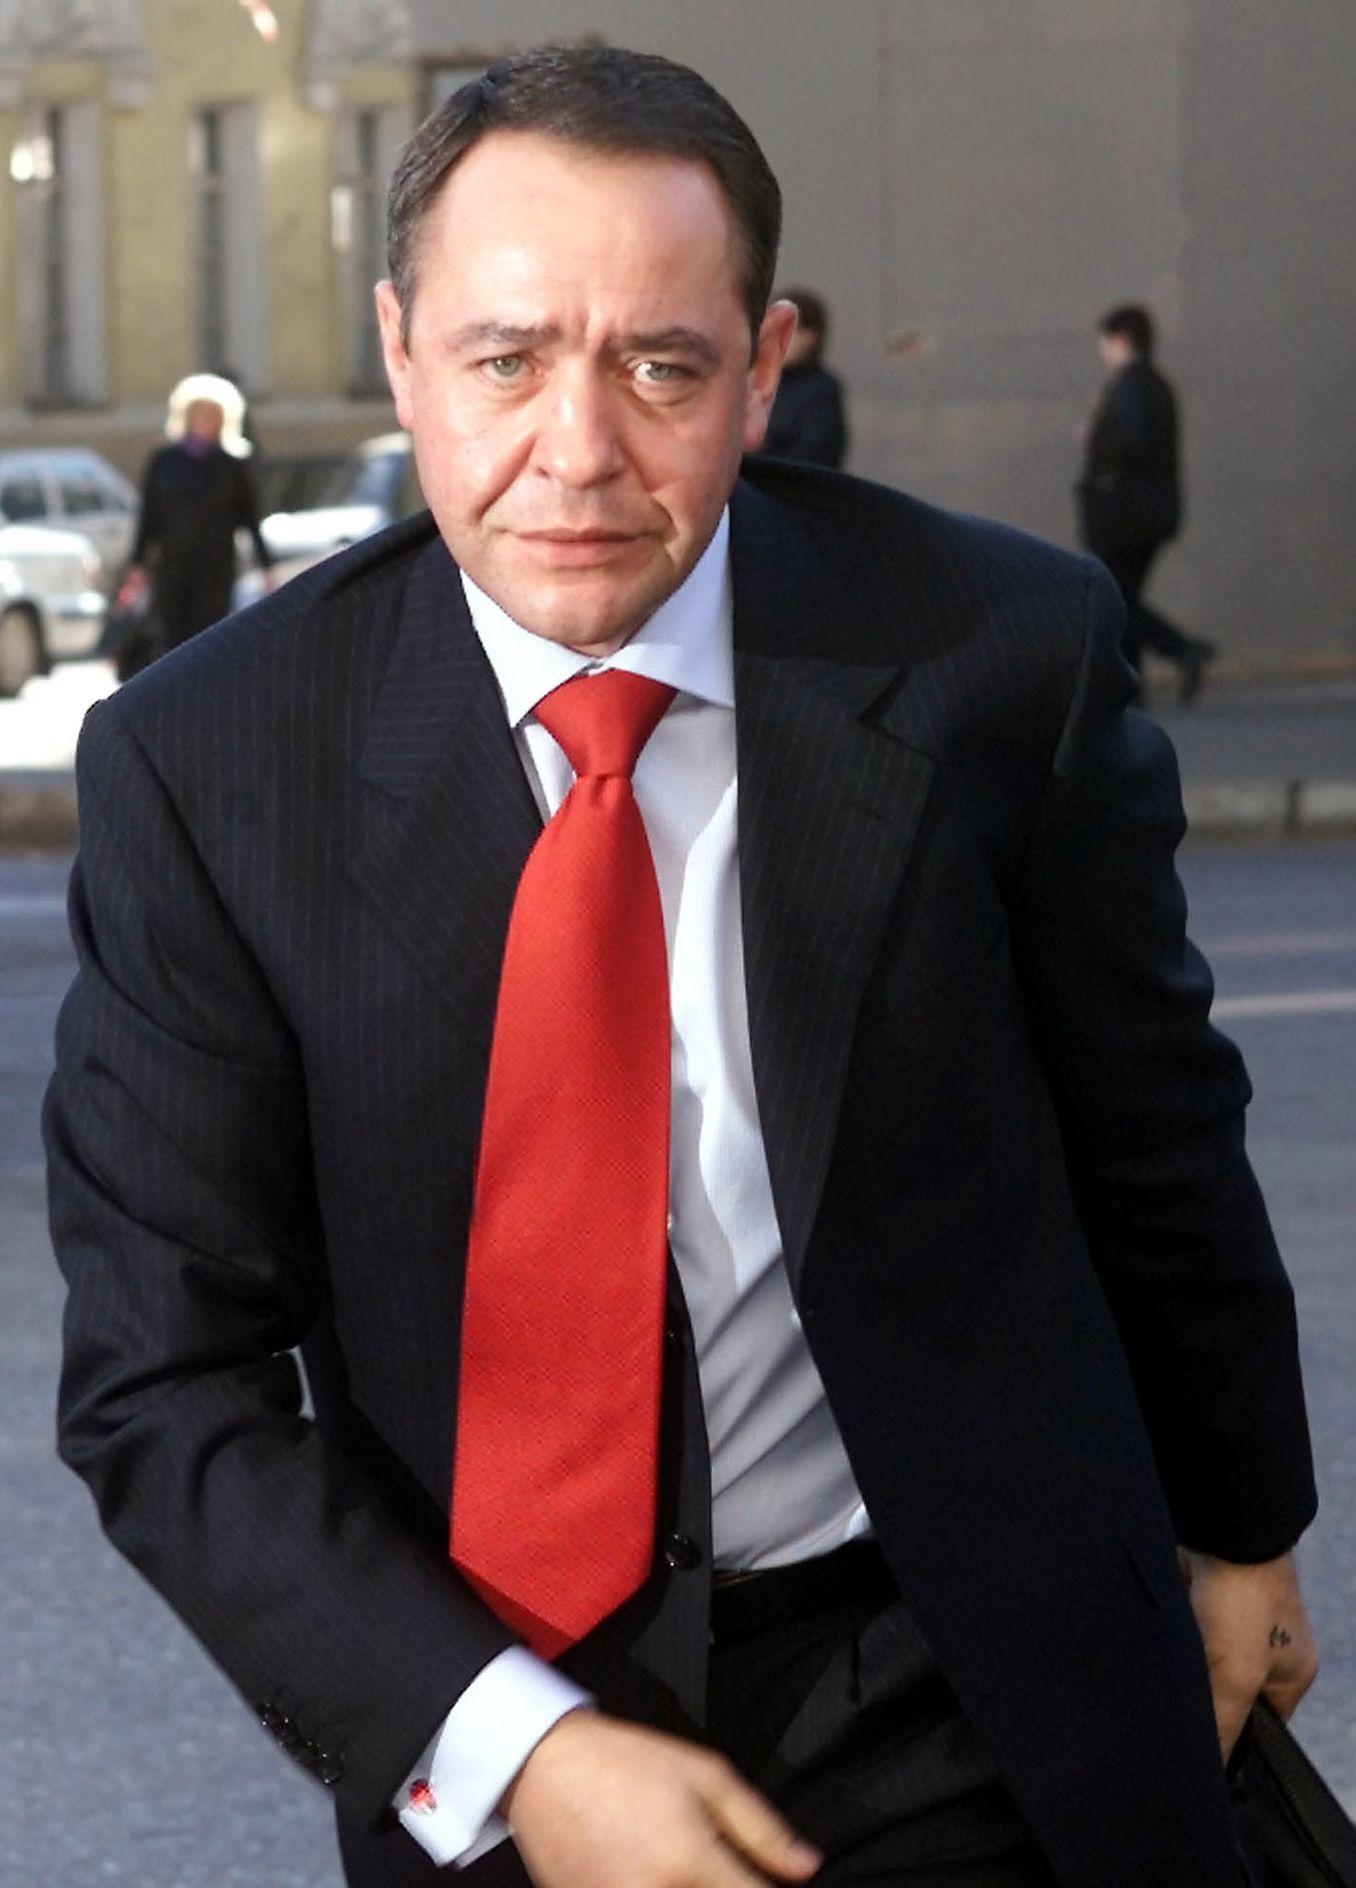 File photo of Russia's Mass Media Minister Mikhail Lesin in central Moscow